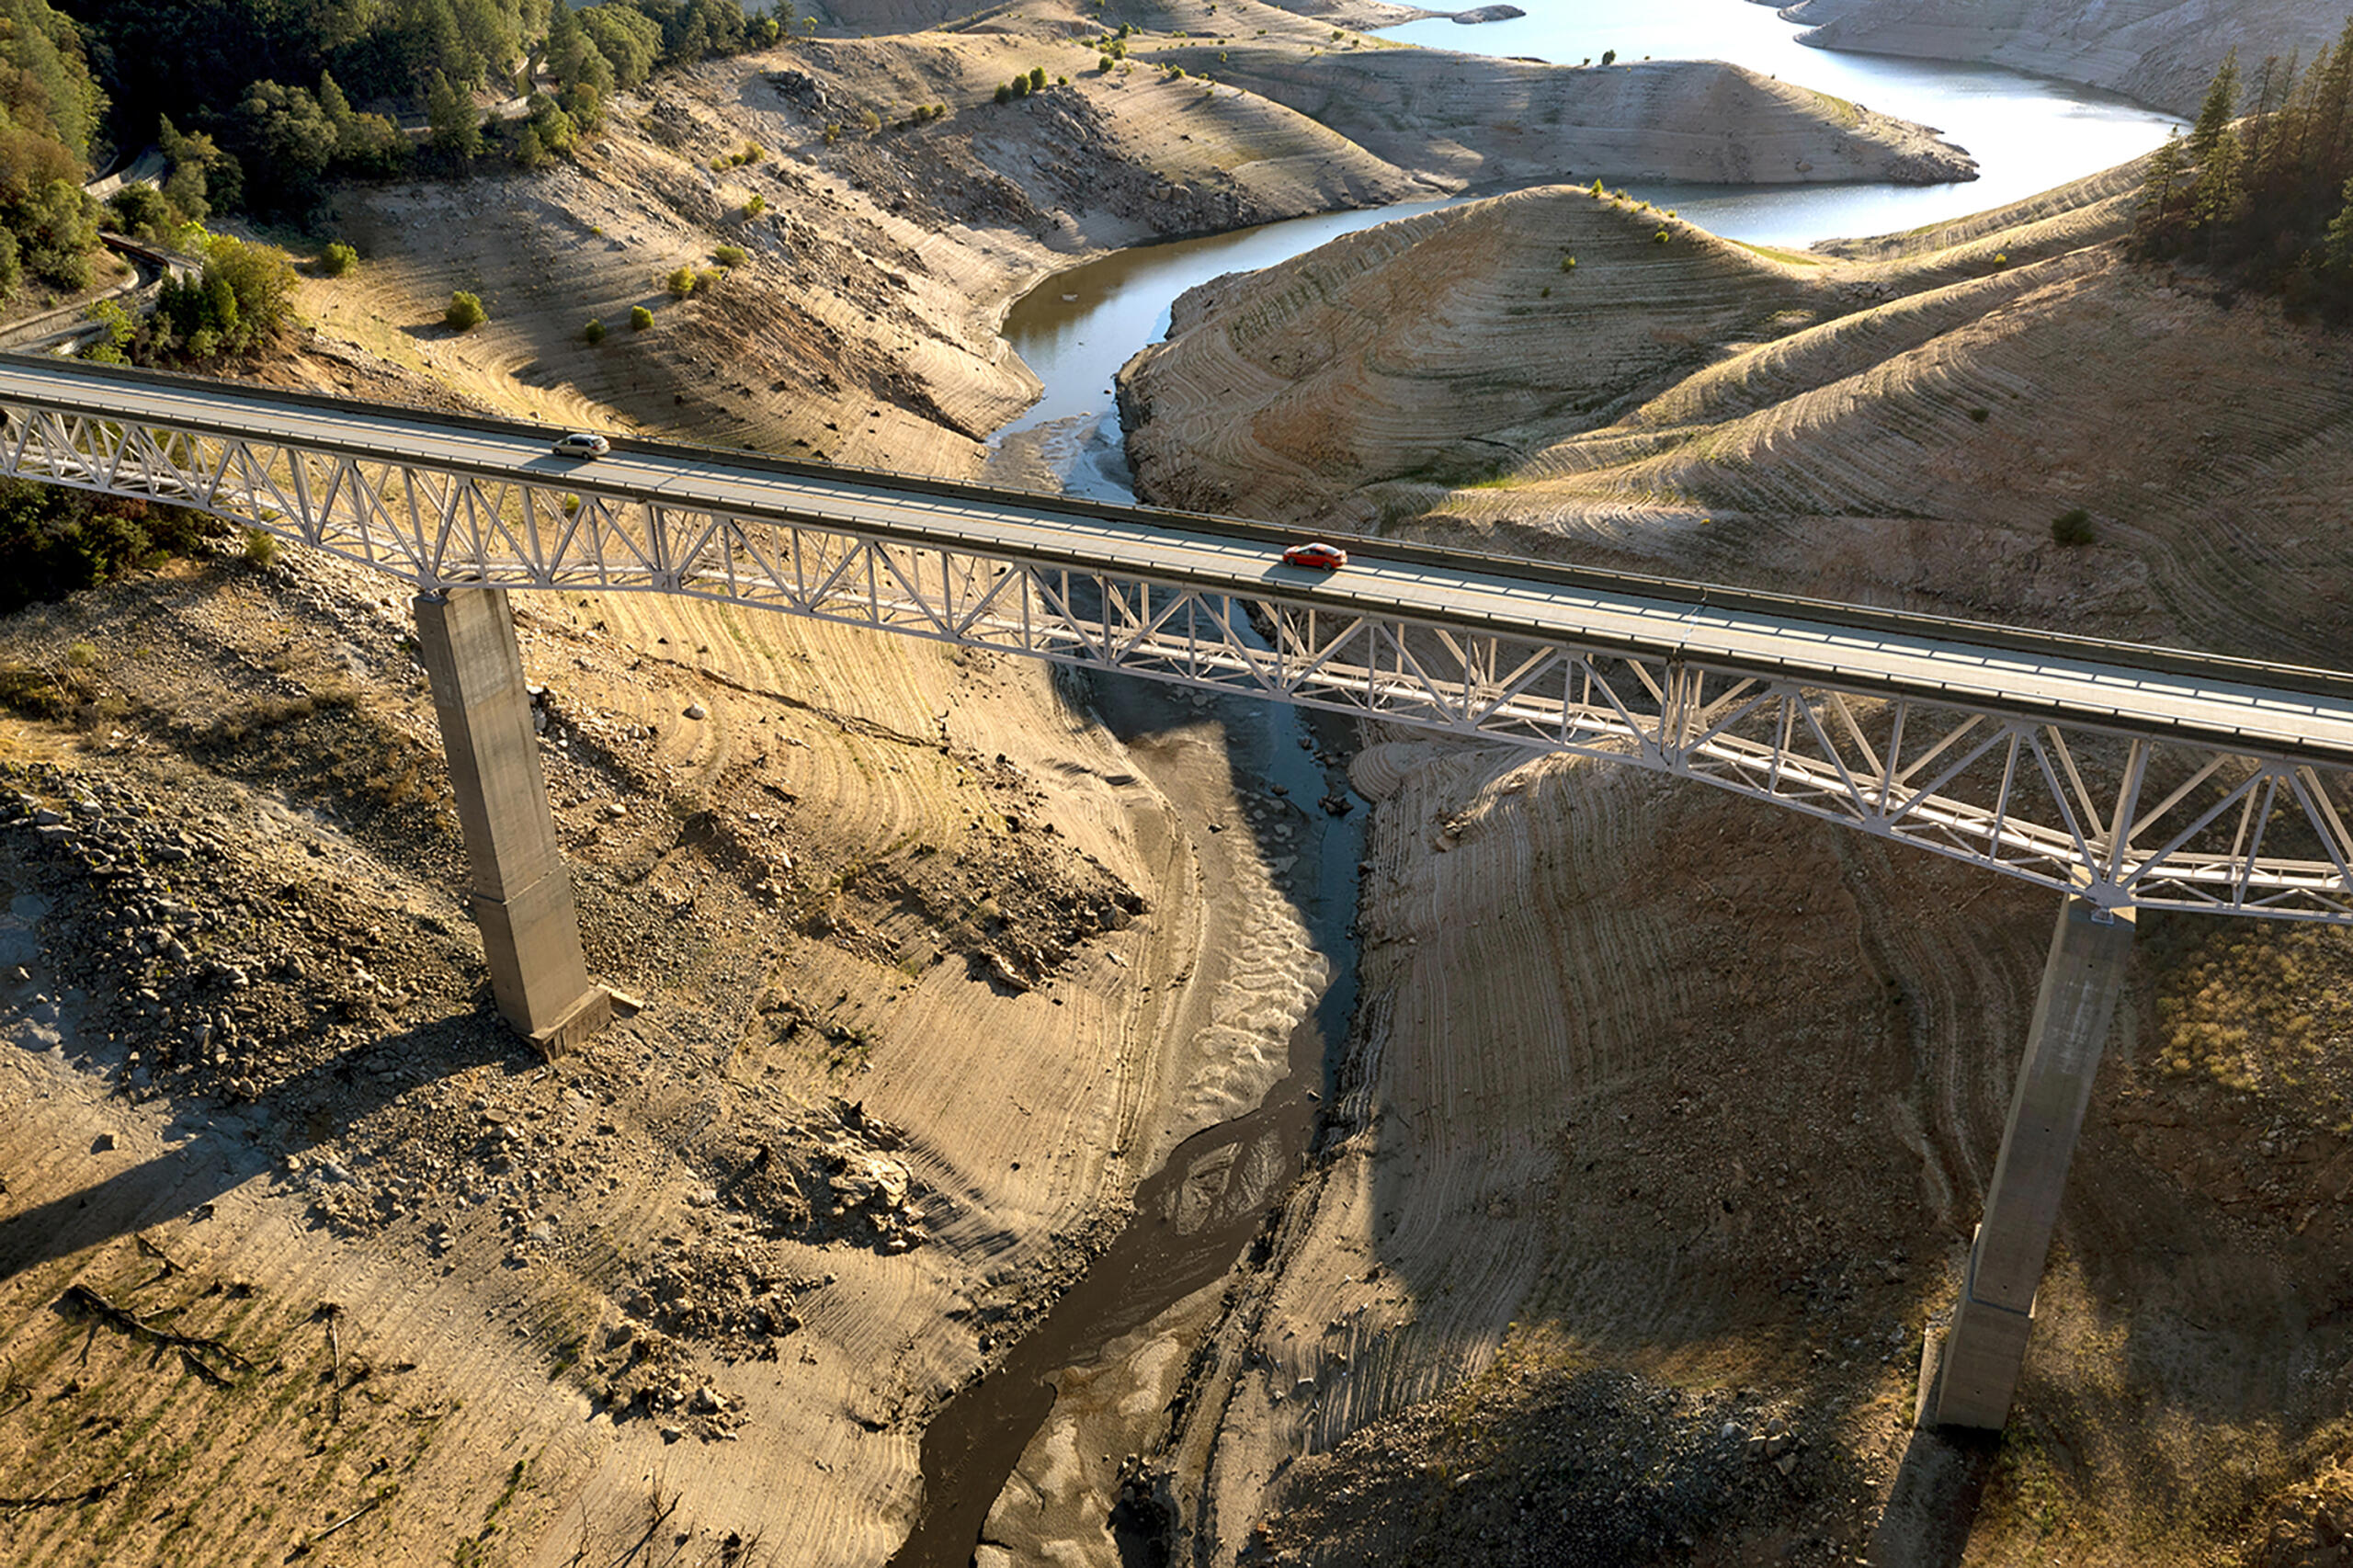 Vehicles cross the Enterprise Bridge at Lake Orovillein in July 2021, with water levels in the biggest state reservoirs well below average.